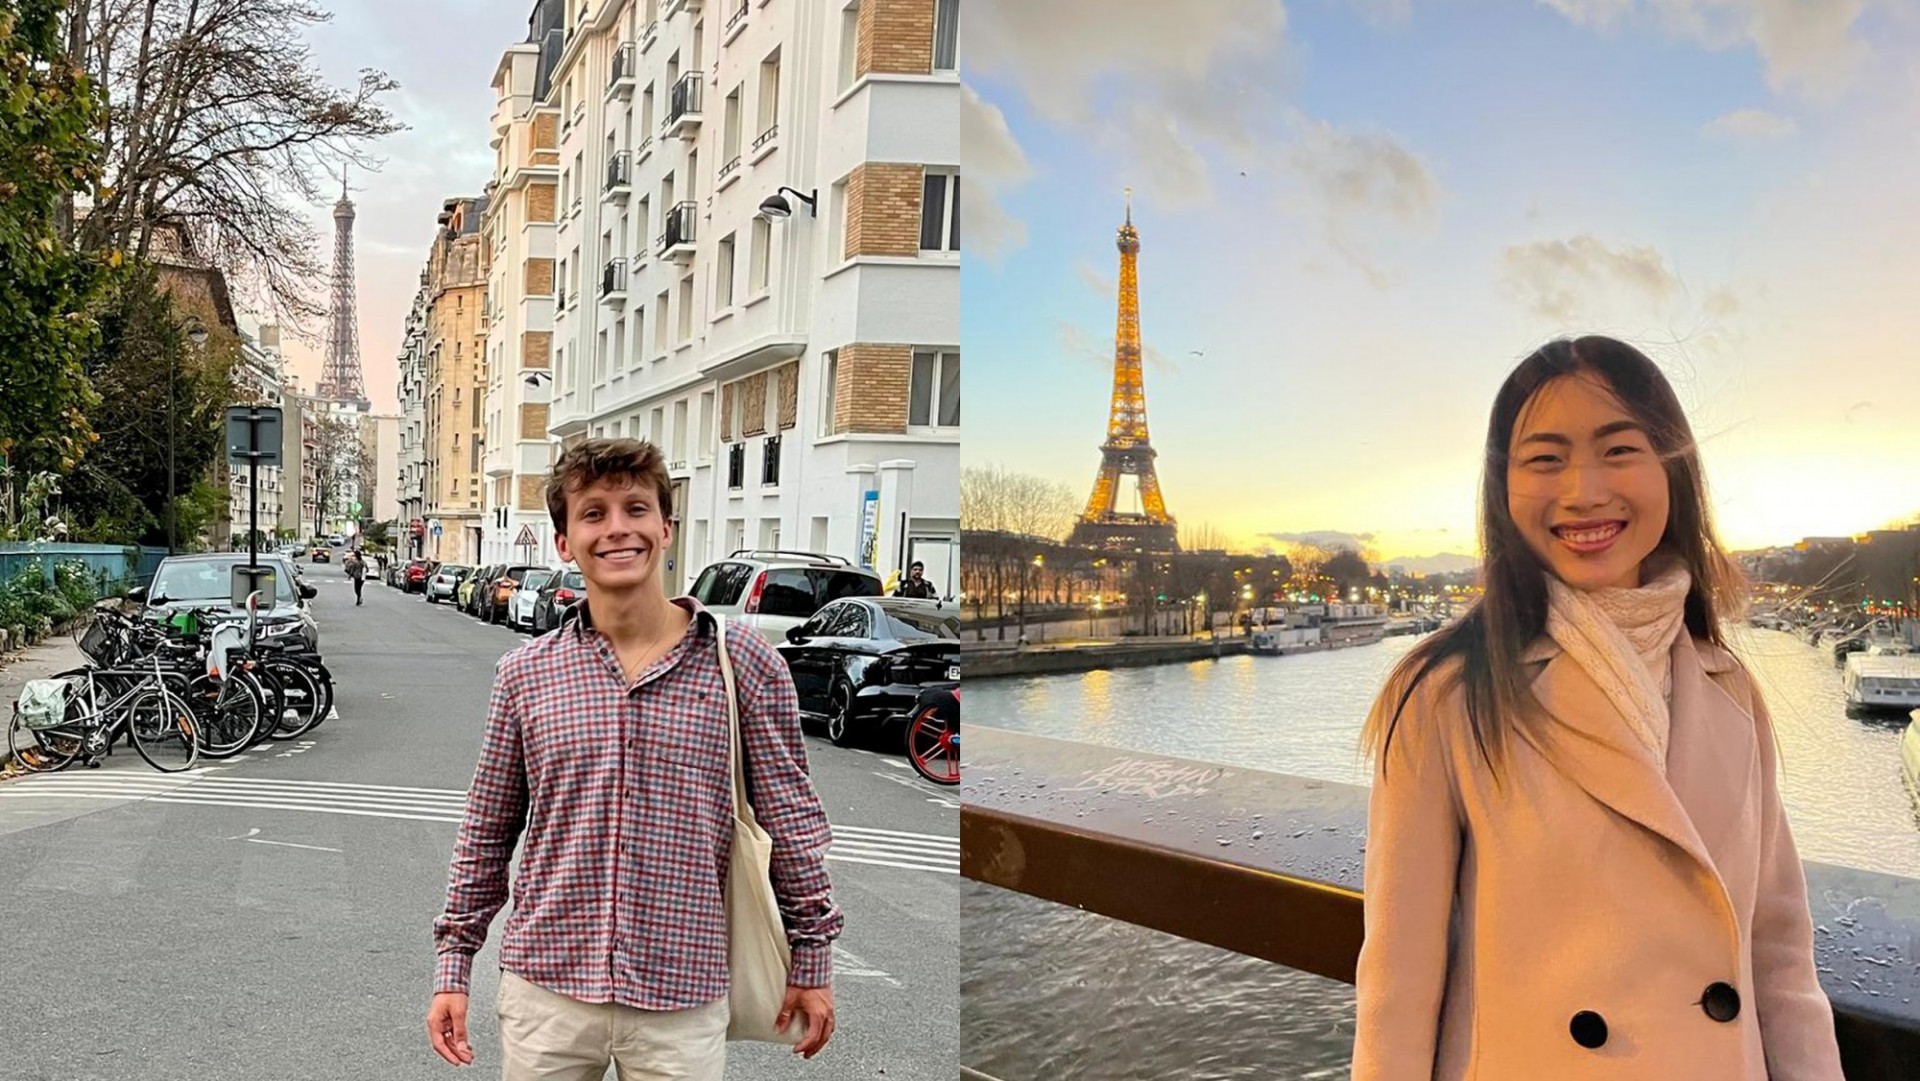 Students Cullen Allen and Sybil Fu in front of the Eiffel Tower